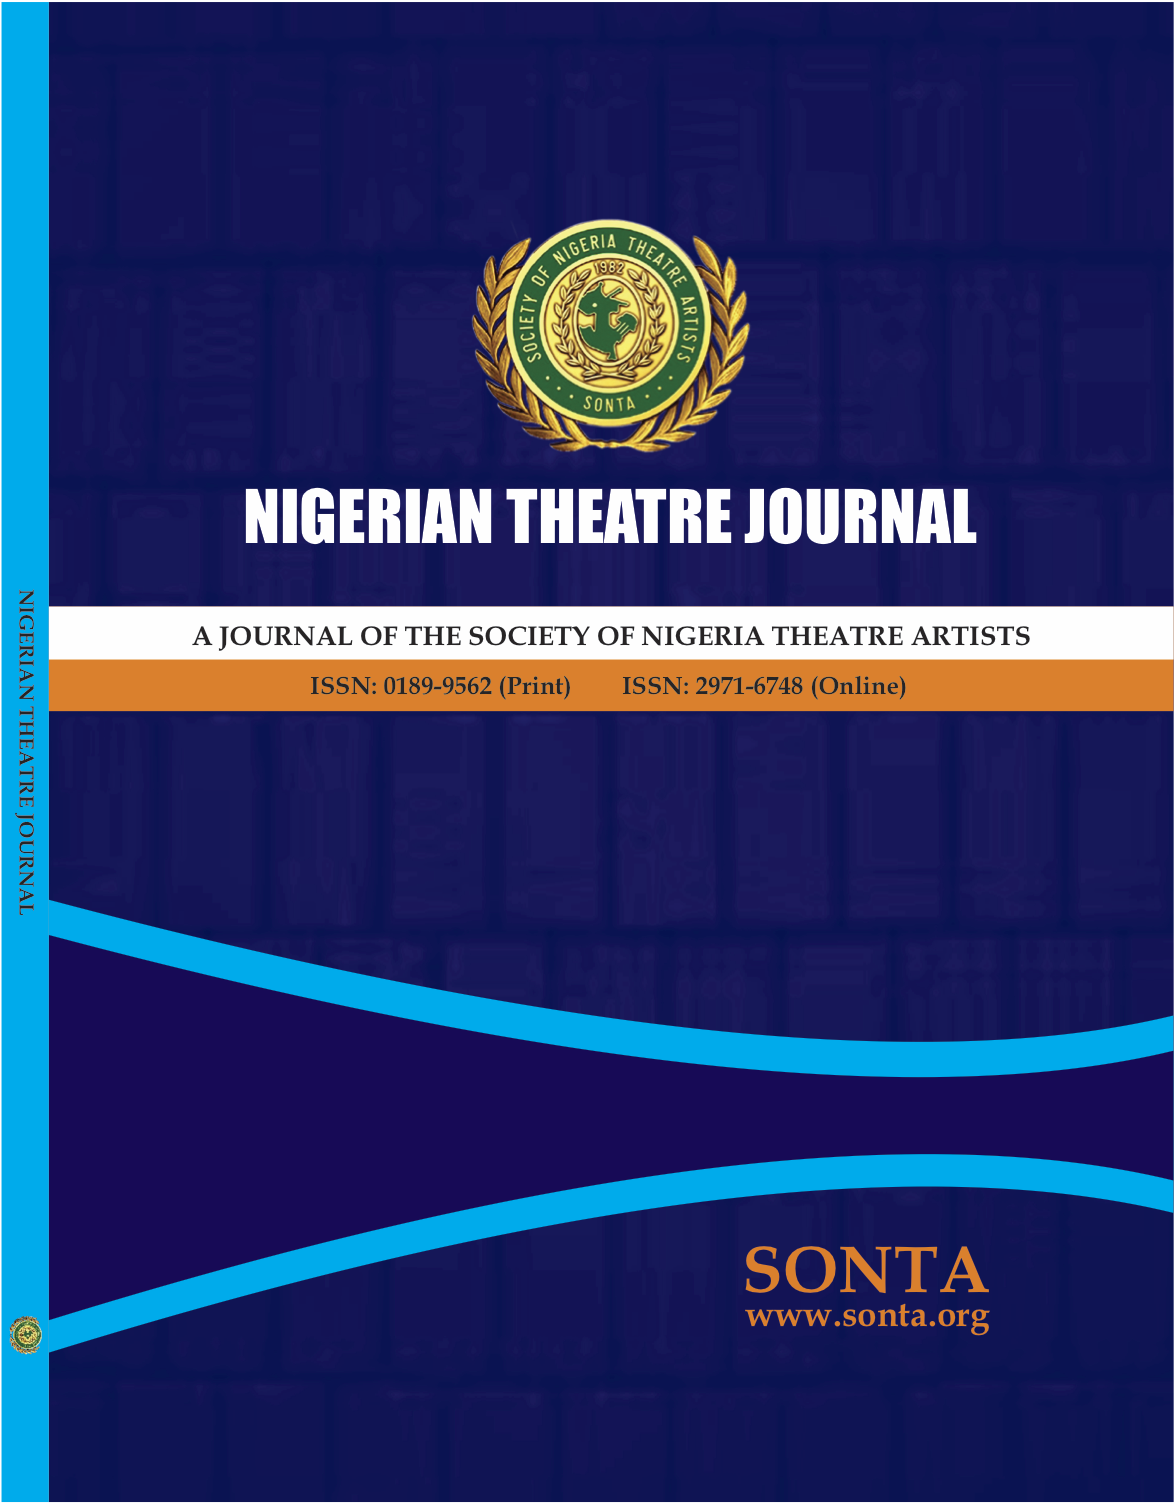 Nigeria Theatre Journal: A Journal of the Society of Nigeria Theatre Artists